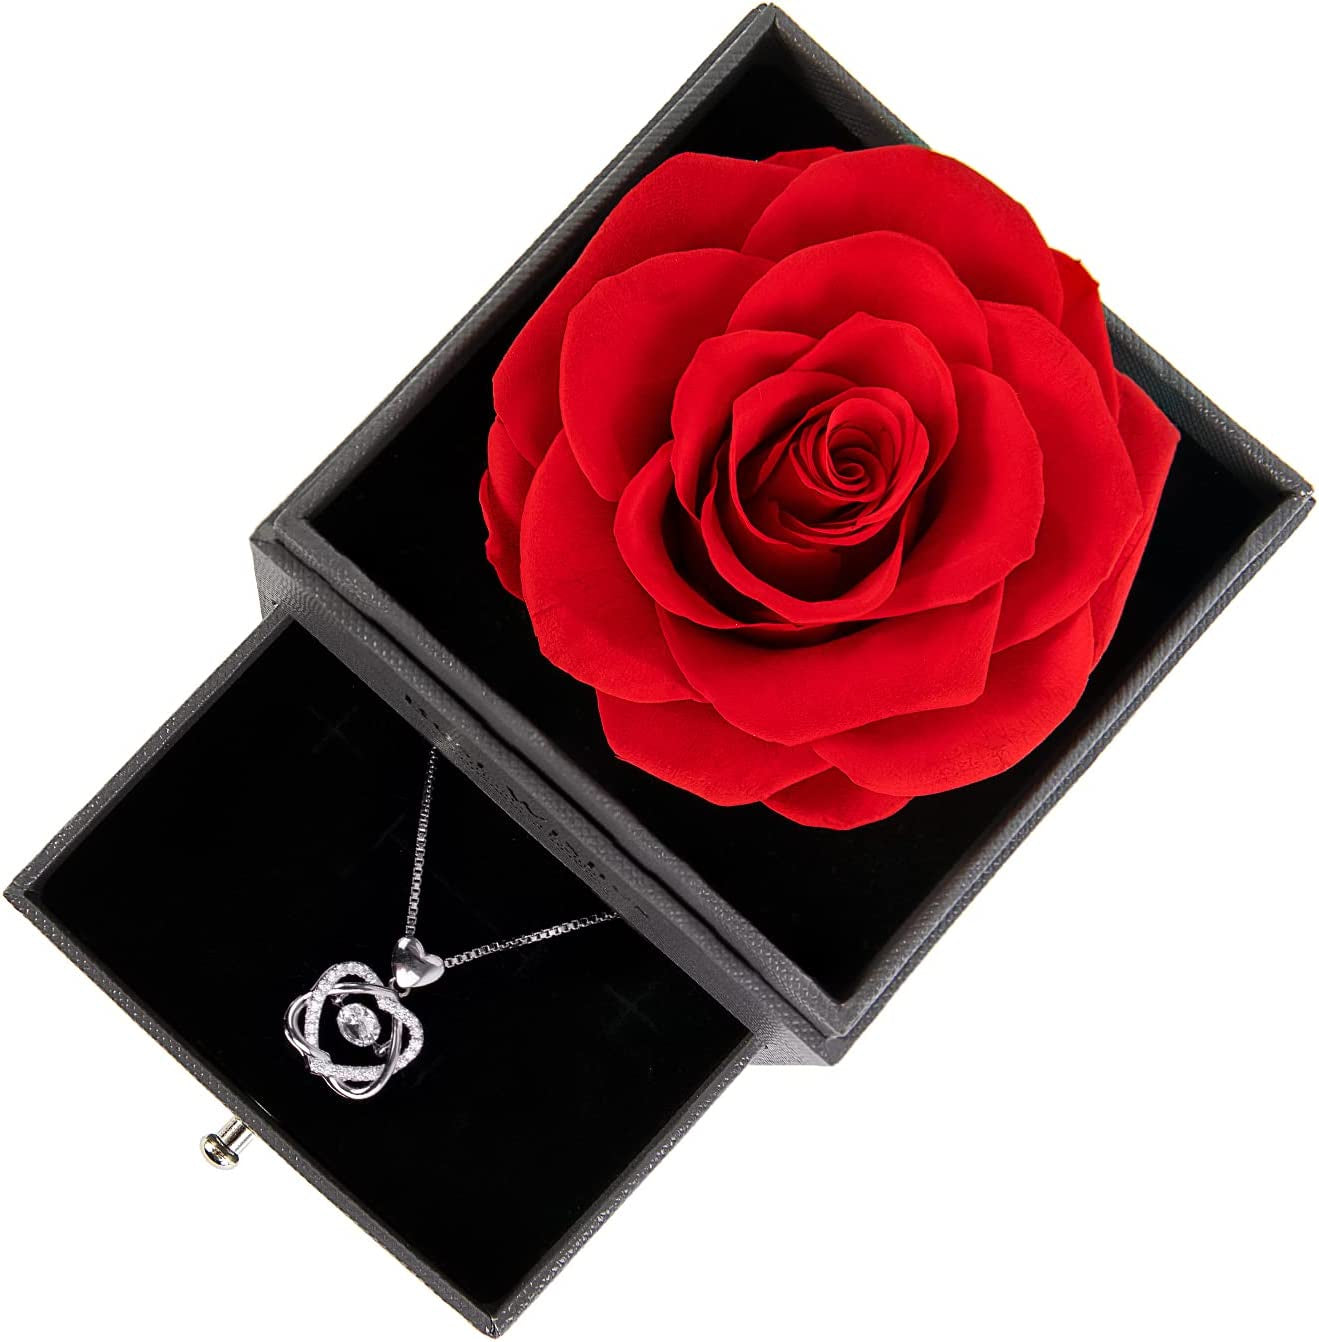 Preserved Real Rose with Dancing Heart Necklace. Birthday Gifts for Women for Her Unique Gifts for Mom Girlfriend Wife Sister. (Red)